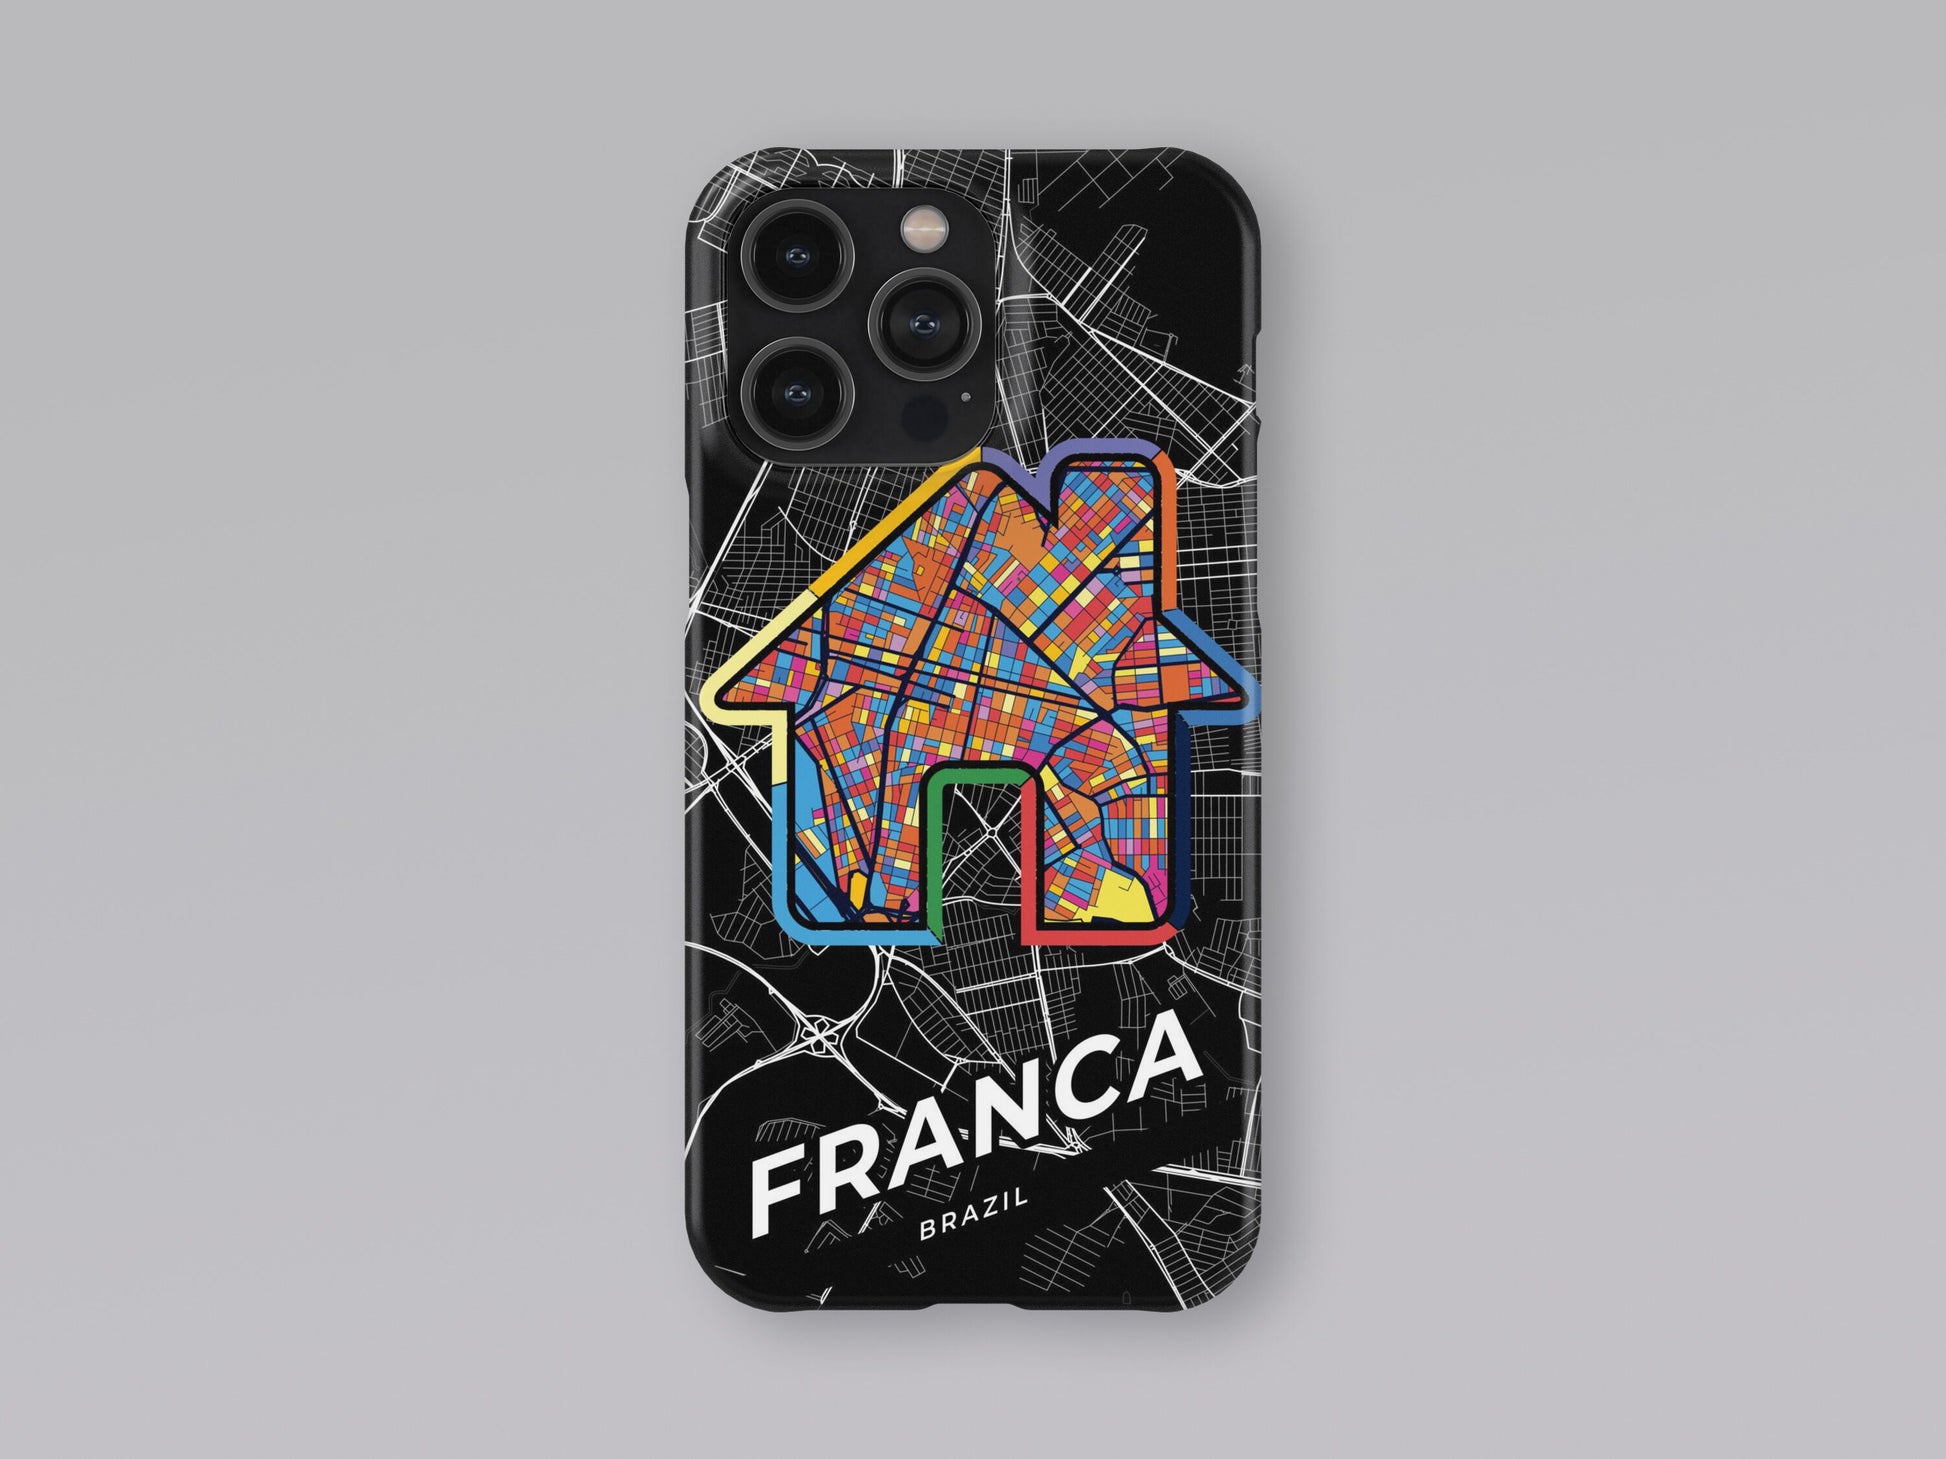 Franca Brazil slim phone case with colorful icon. Birthday, wedding or housewarming gift. Couple match cases. 3